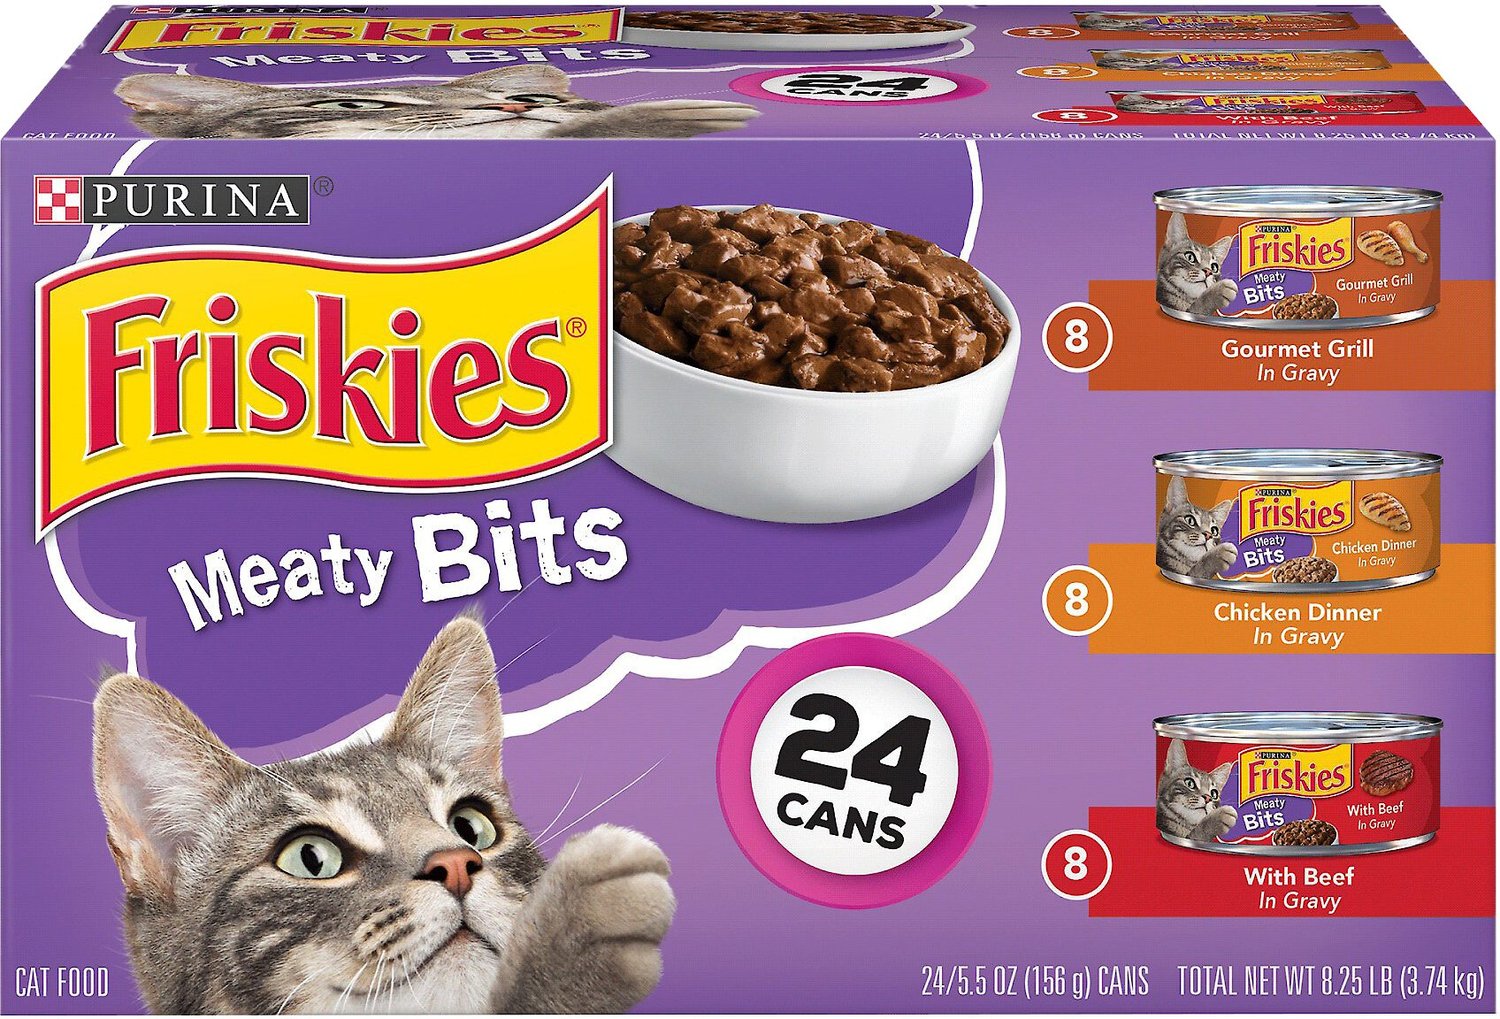 Friskies Meaty Bits Variety Pack Canned Cat Food, 5.5oz, case of 24